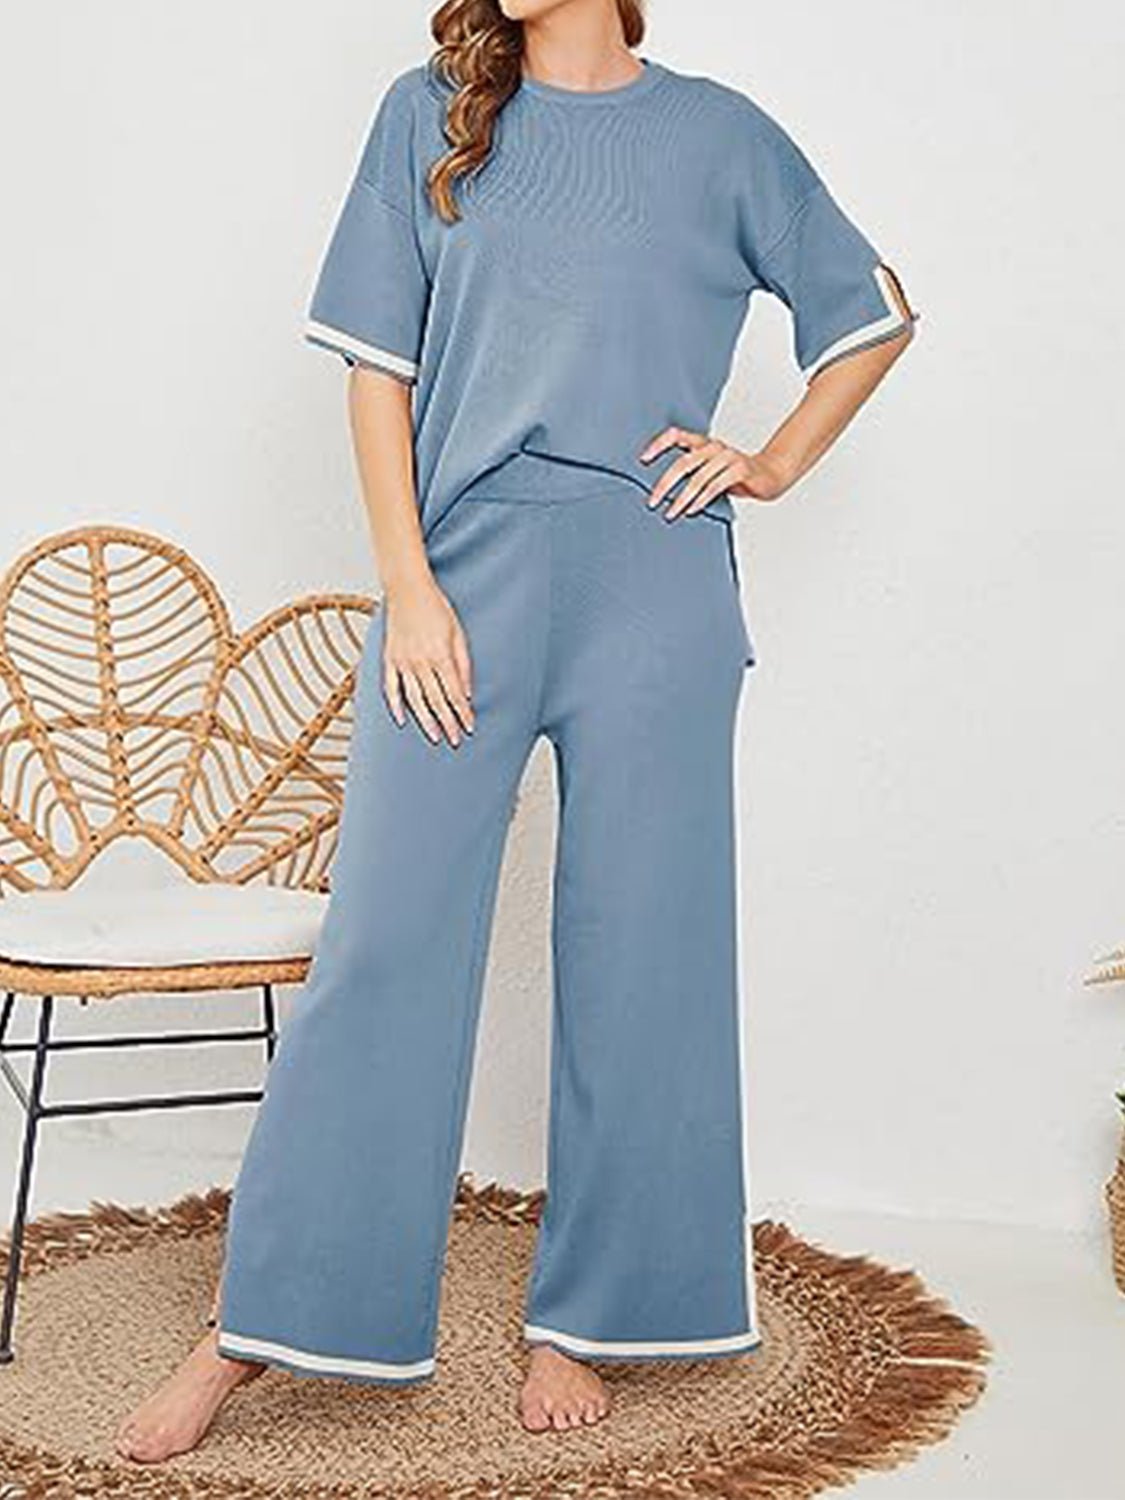 Contrast High-Low Sweater and Knit Pants Set - Fashion Girl Online Store